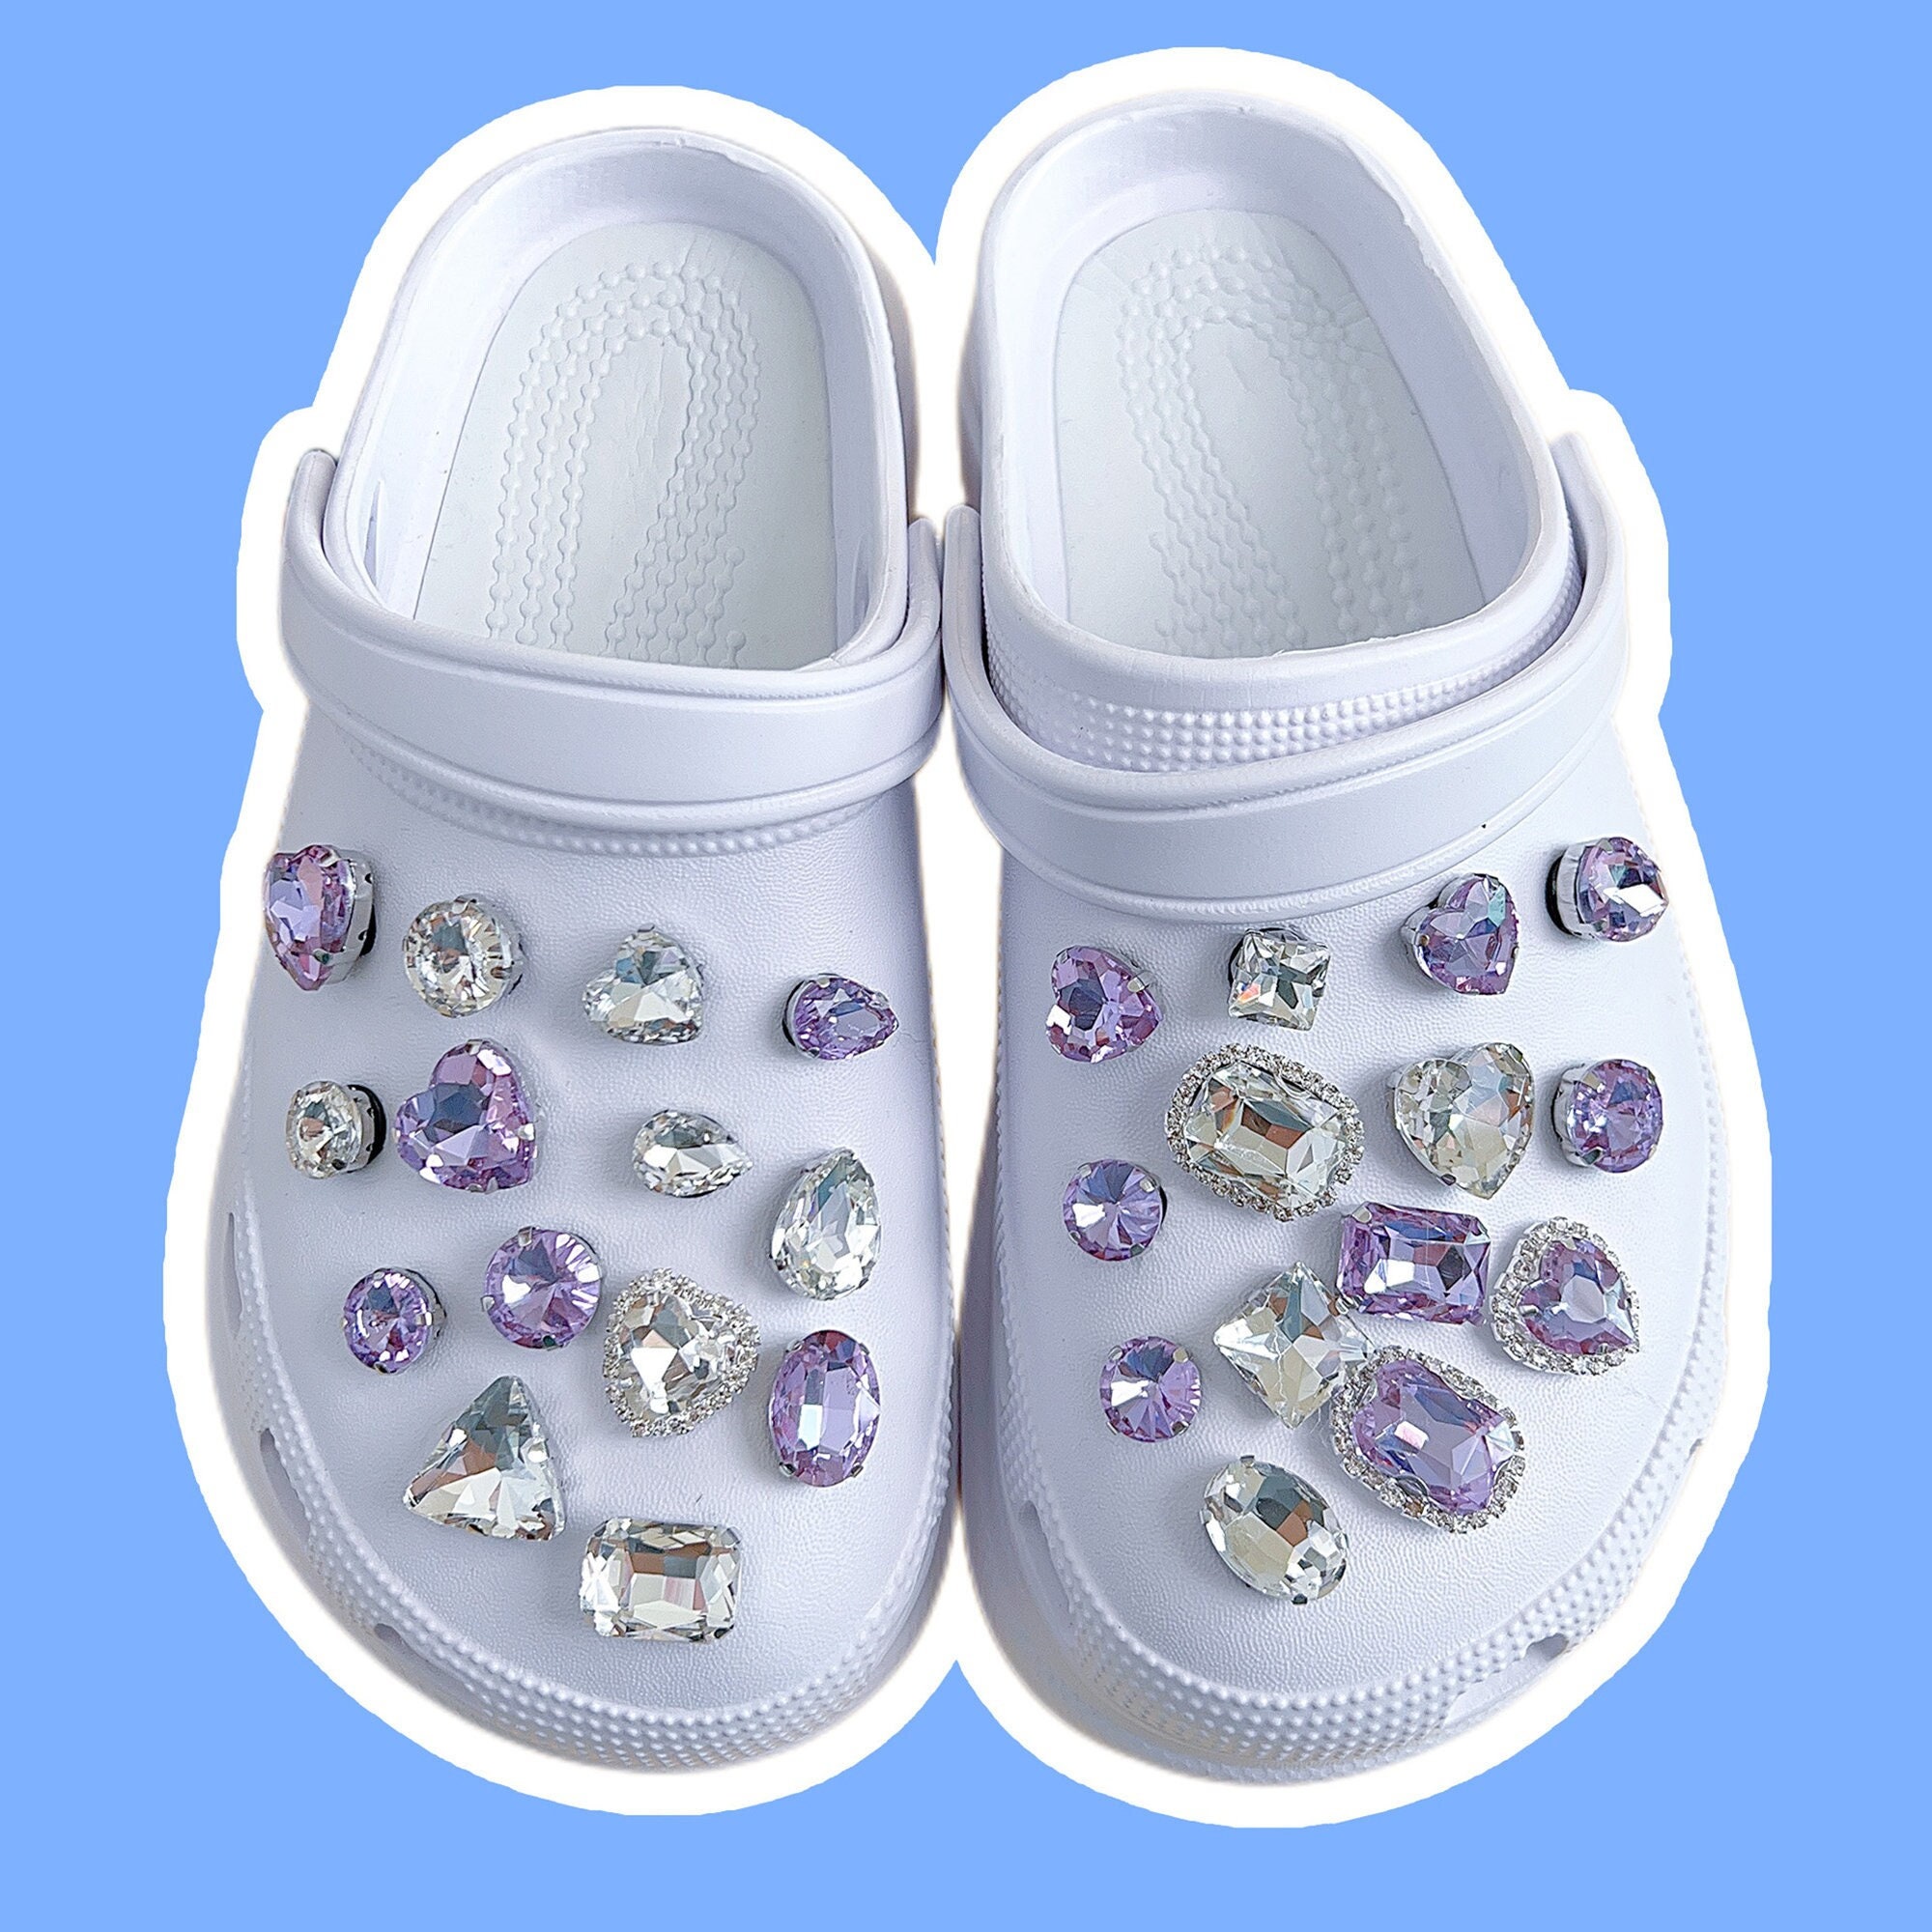 Finally got my white crocs jazzed up with some bling. Looking to